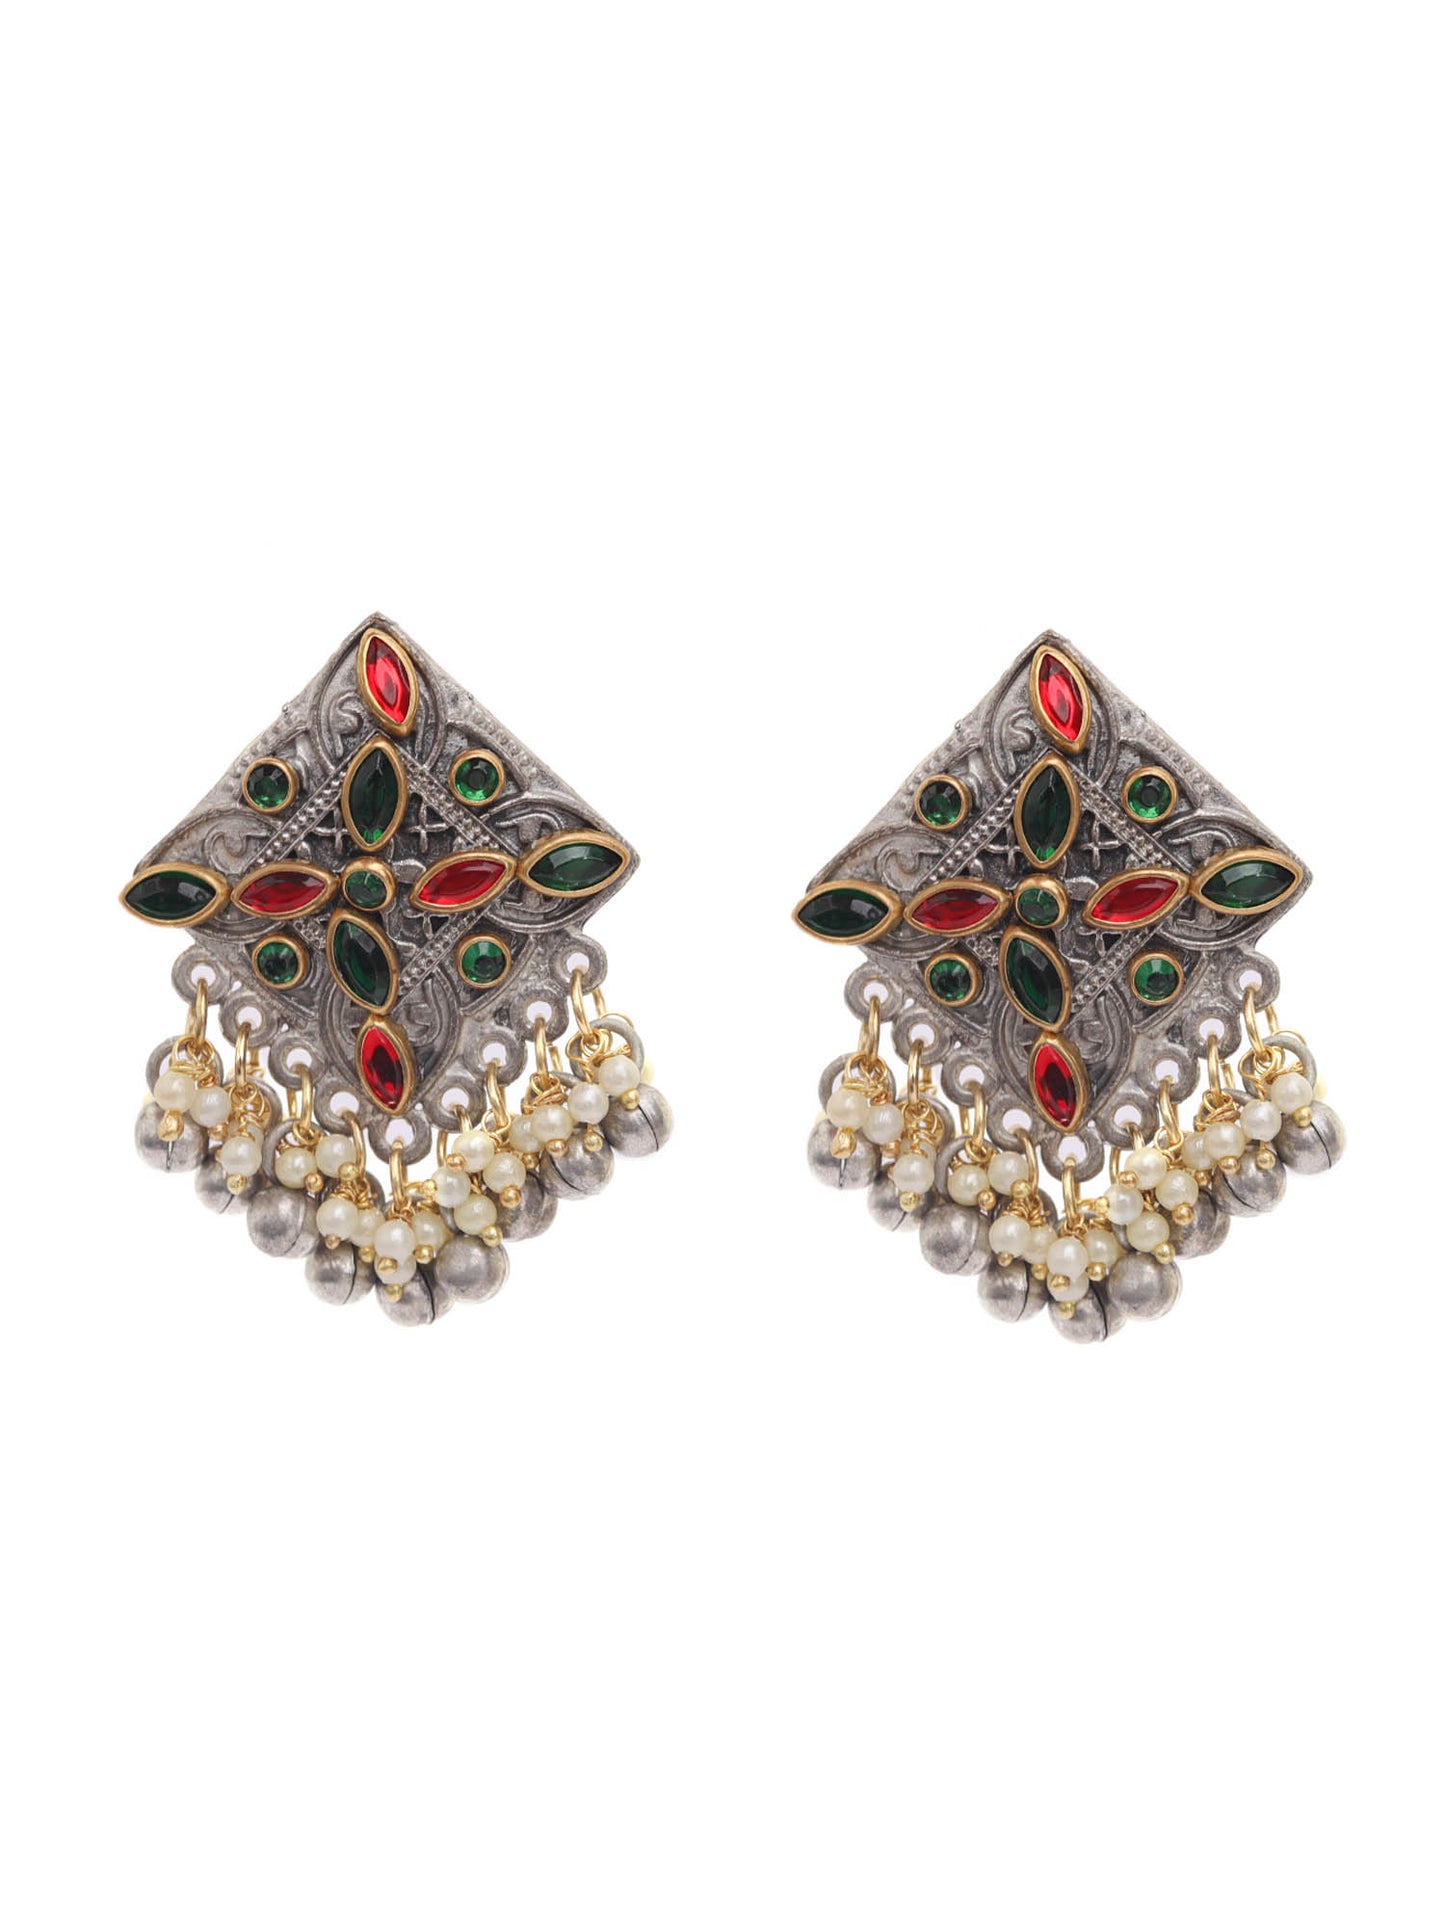 Faux Pearly Trinkets Clump Earrings in Red & Green Stone